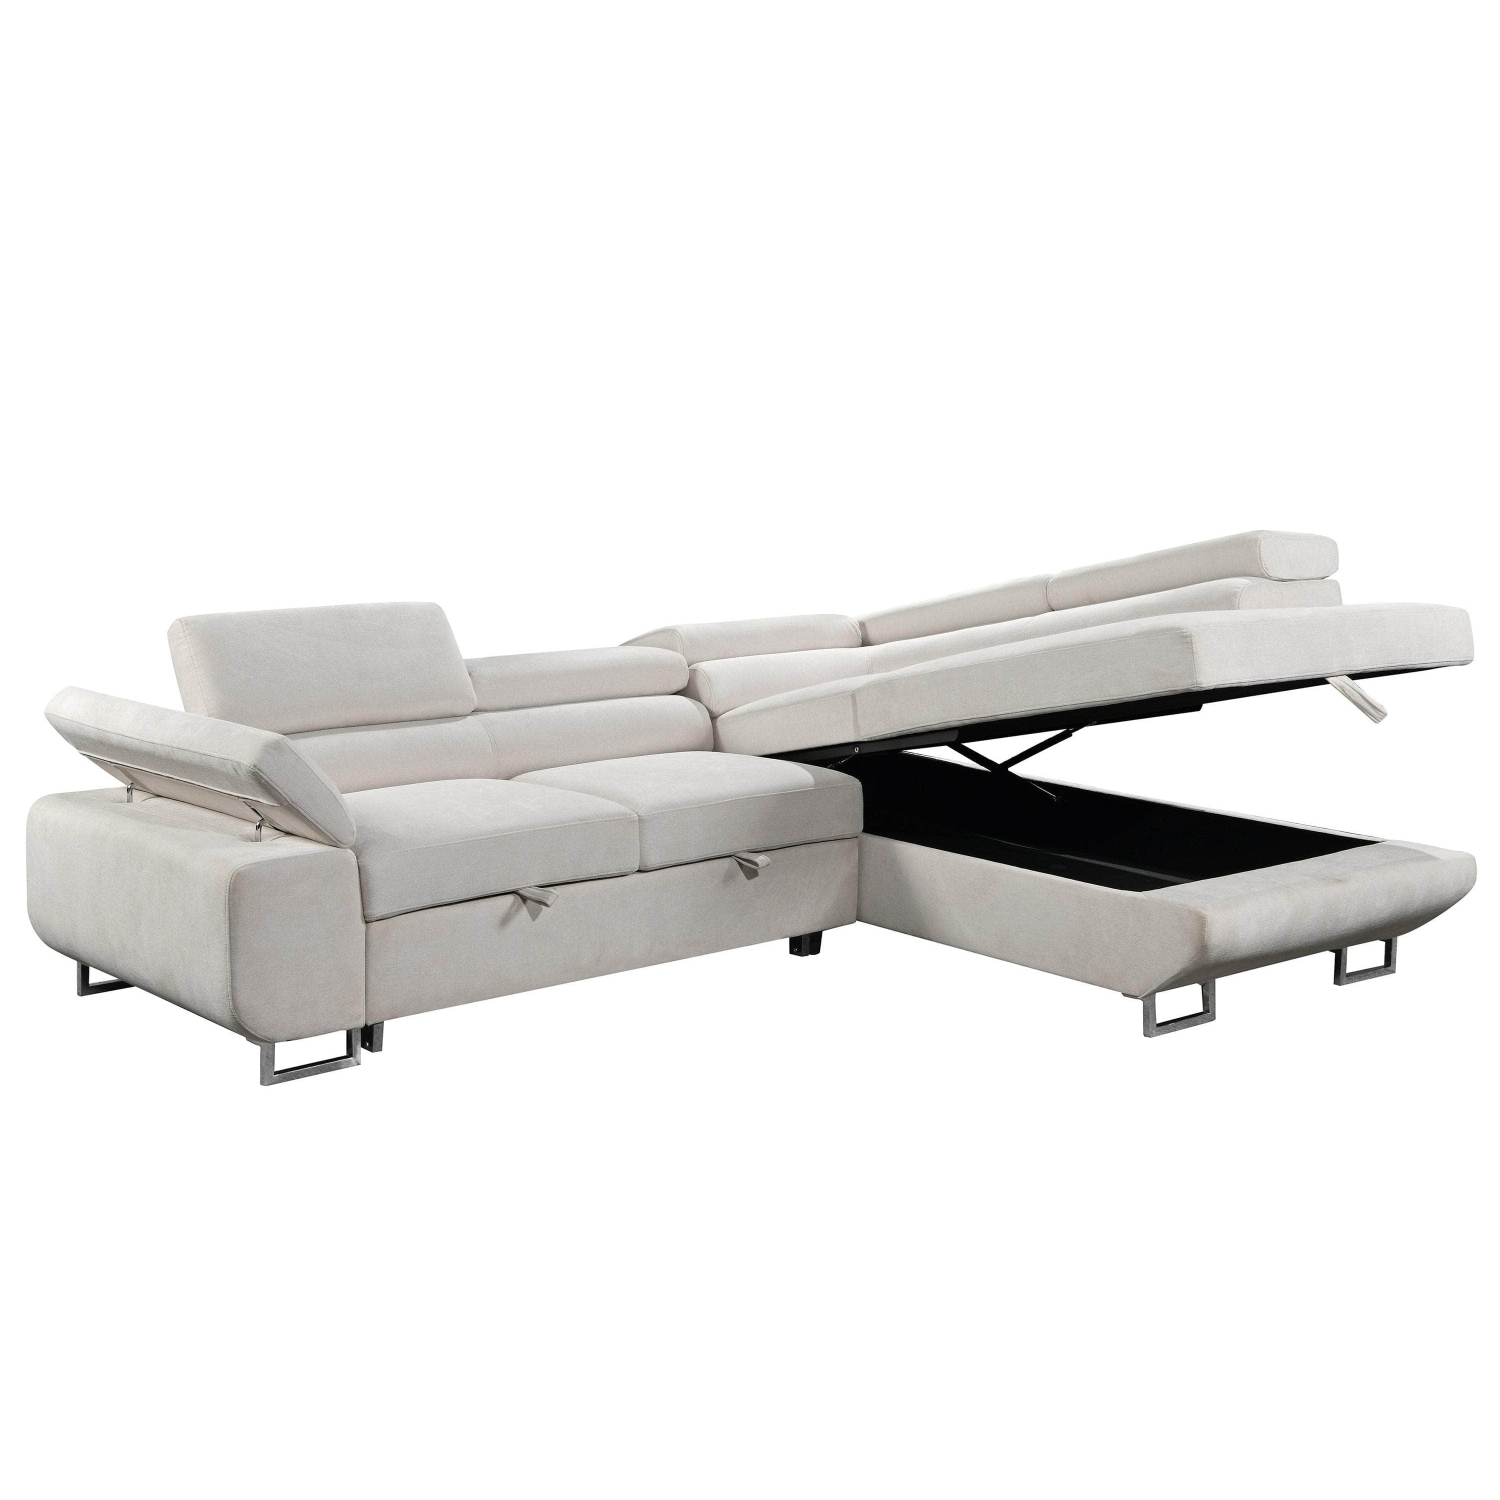 Urban Cali Hollywood Sleeper Sectional Sofa Bed with Adjustable Headrests and Right Storage Chaise in Ulani Cream